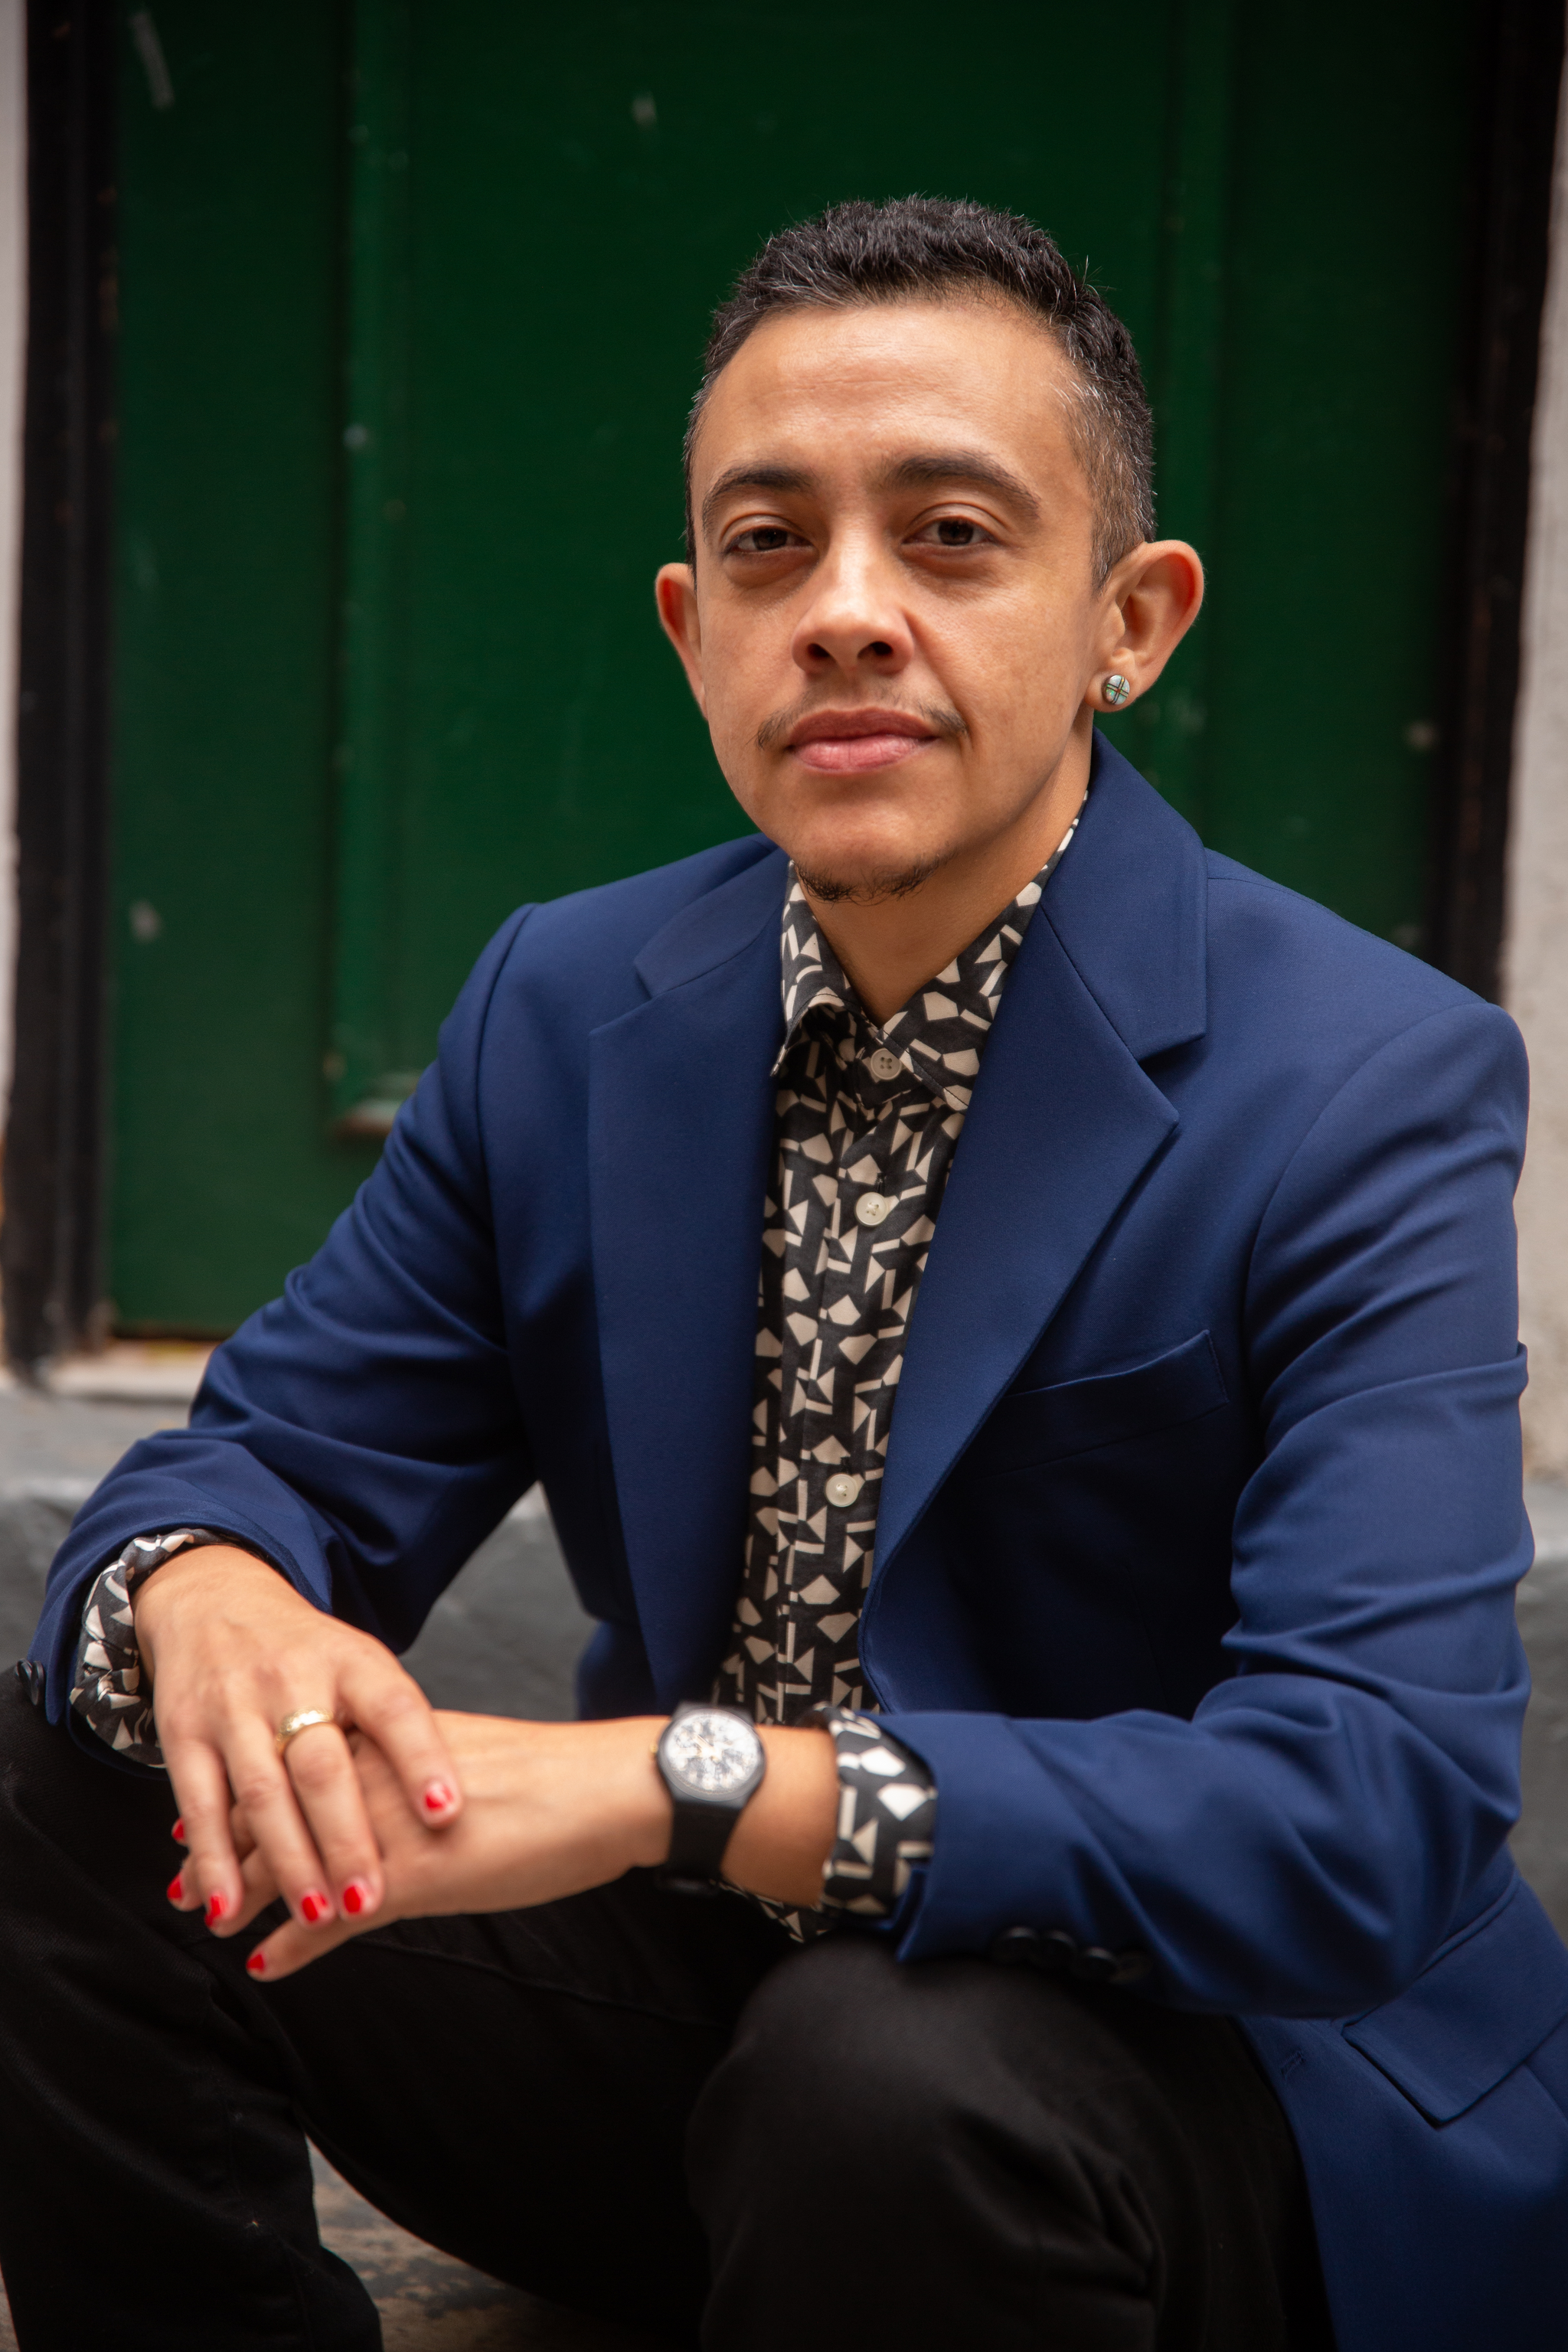 A portrait of J. Soto who wears a blue blazer and poses sitting with arms propped on his knees. He wears watch on one wrist and pink nail polish. He looks directly at us. 